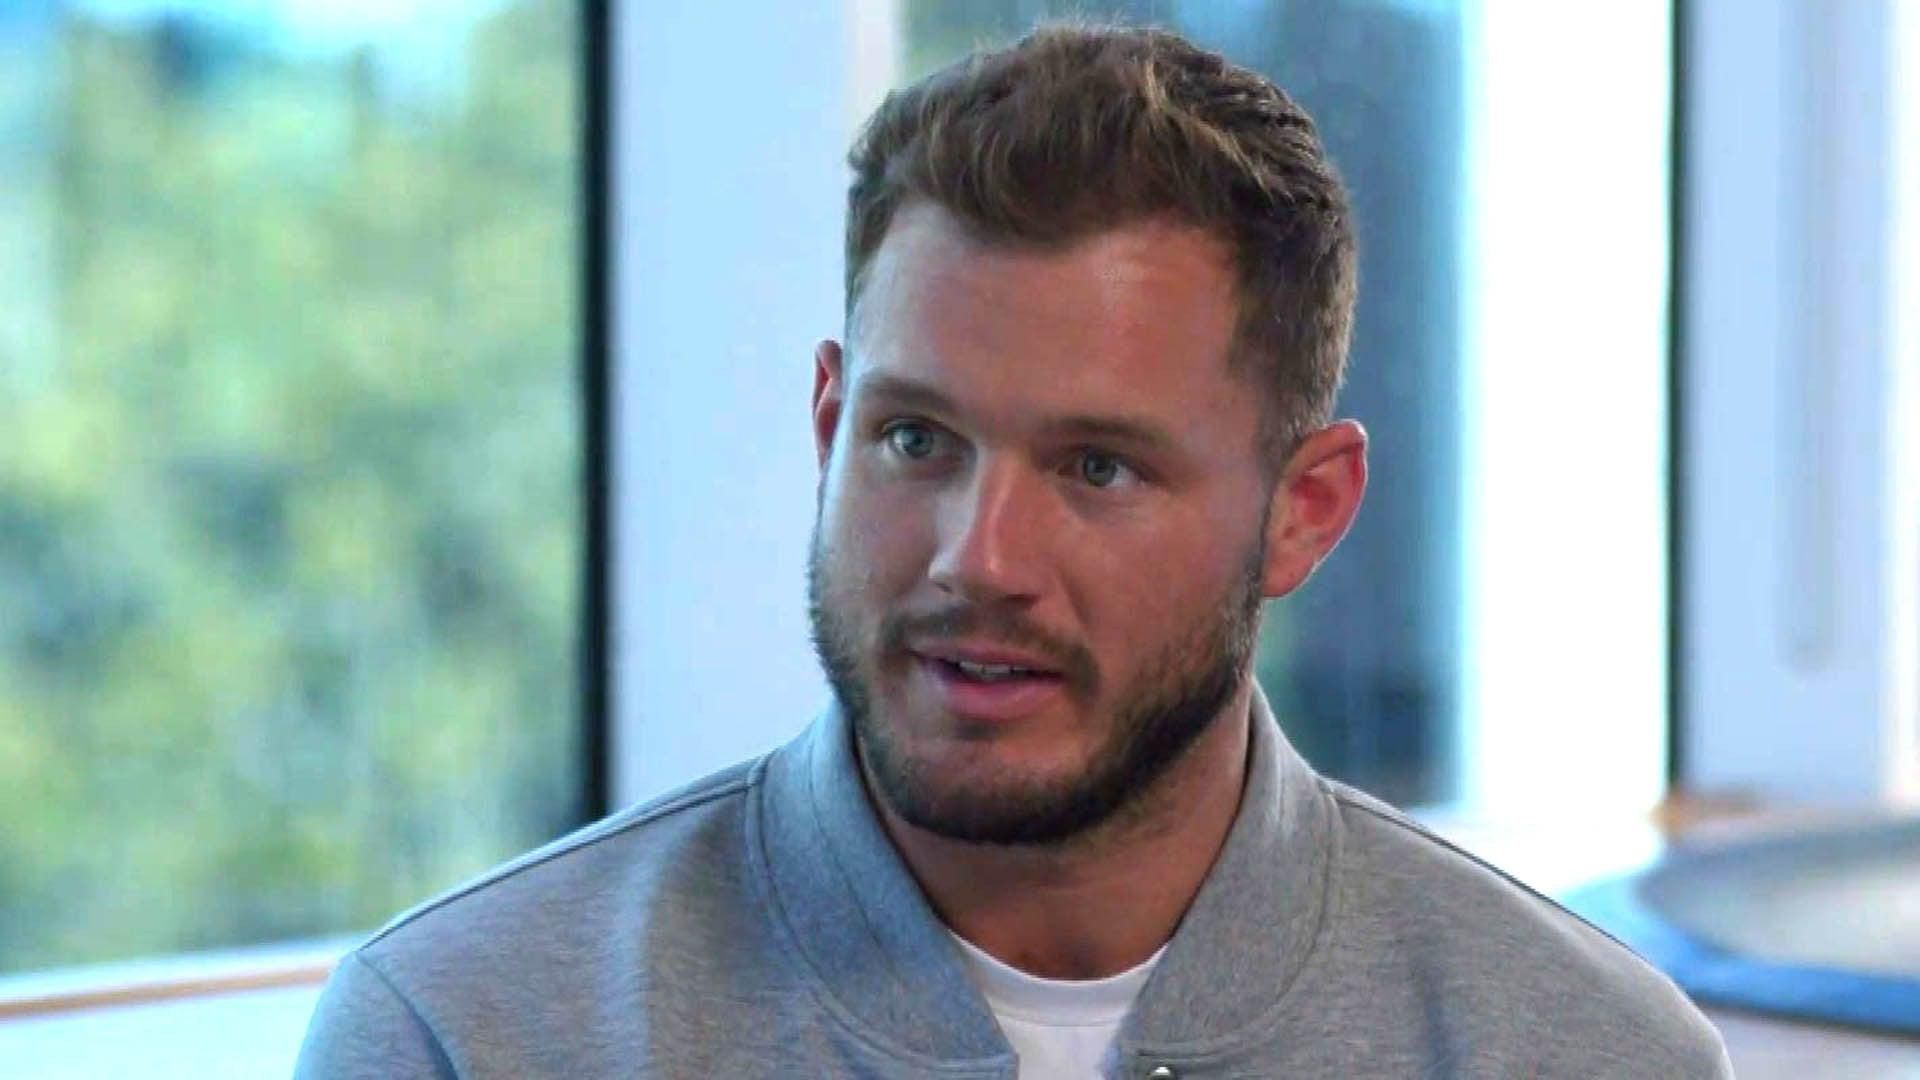 Colton Underwood Is Taking Responsibility For His Past By Coming Out, Not Deflecting From It